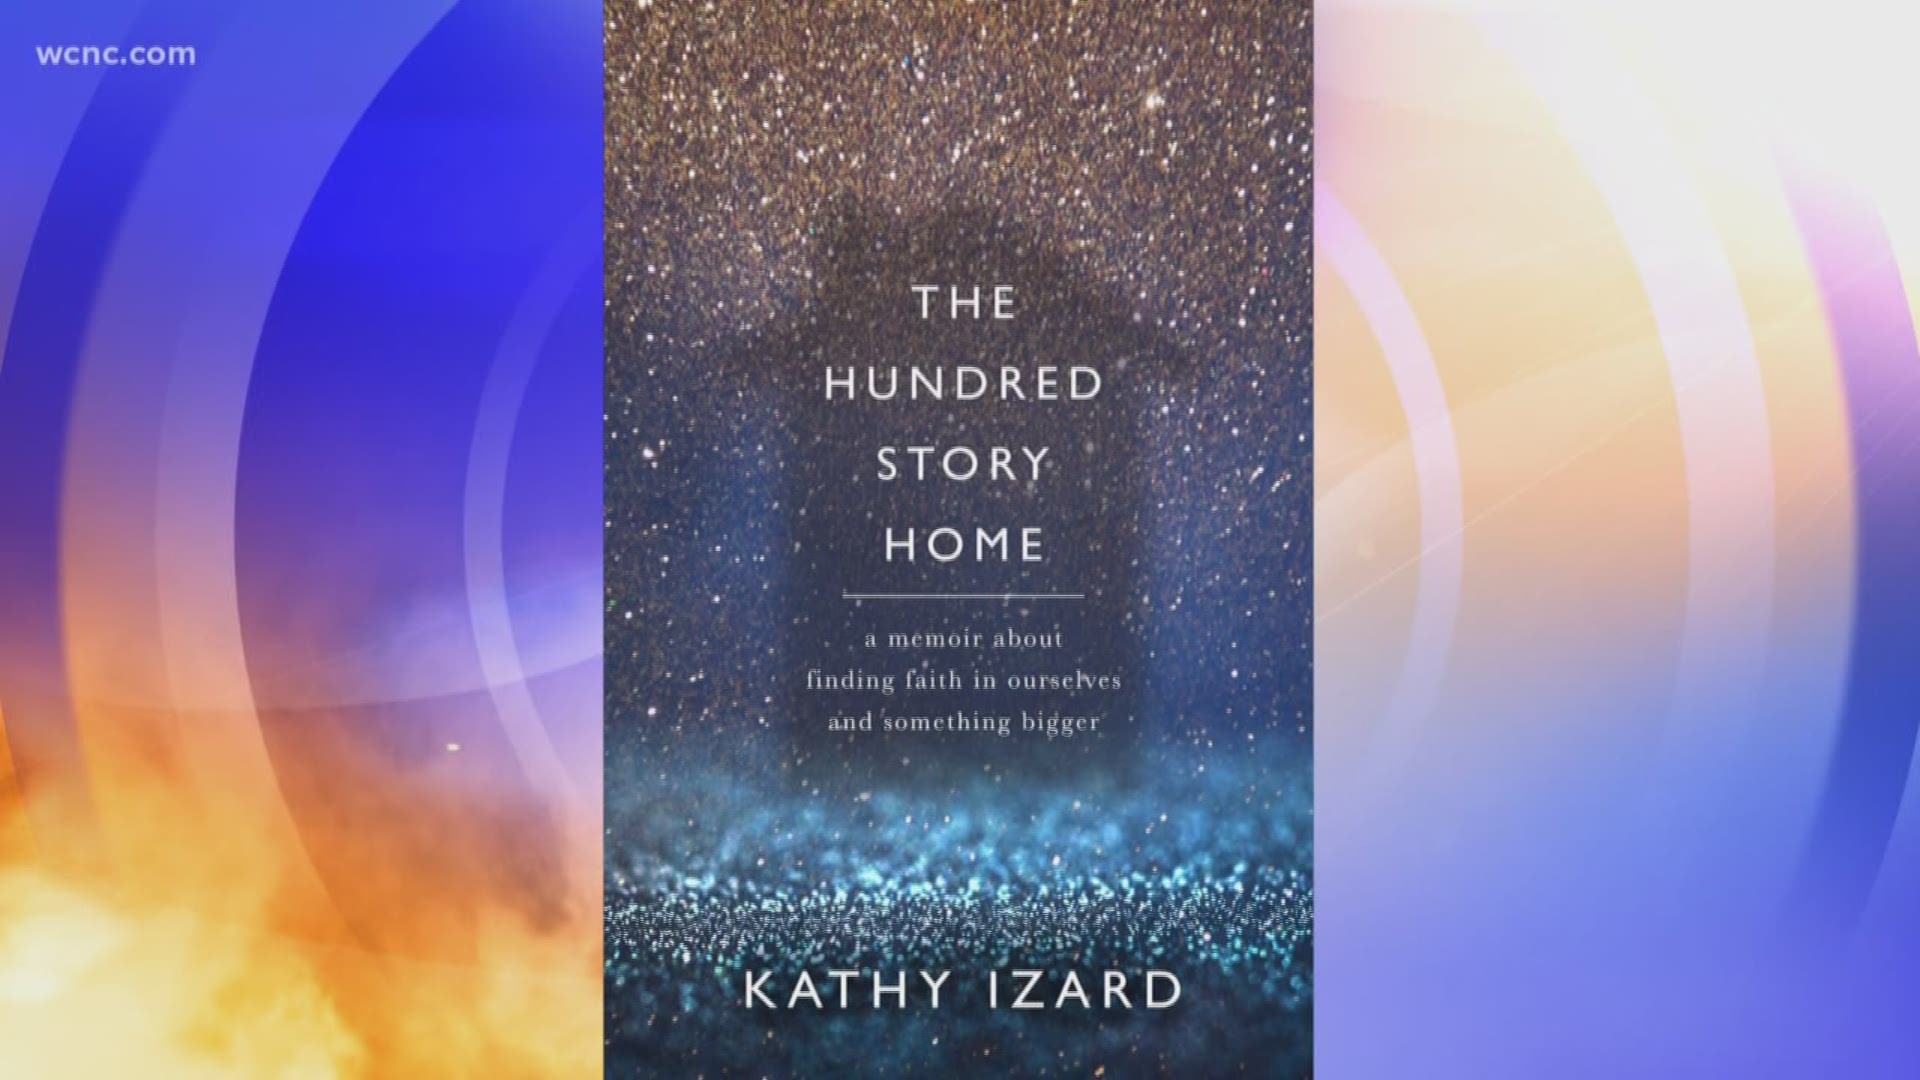 Author Kathy Izard tells us about her book ?The hundred story home?